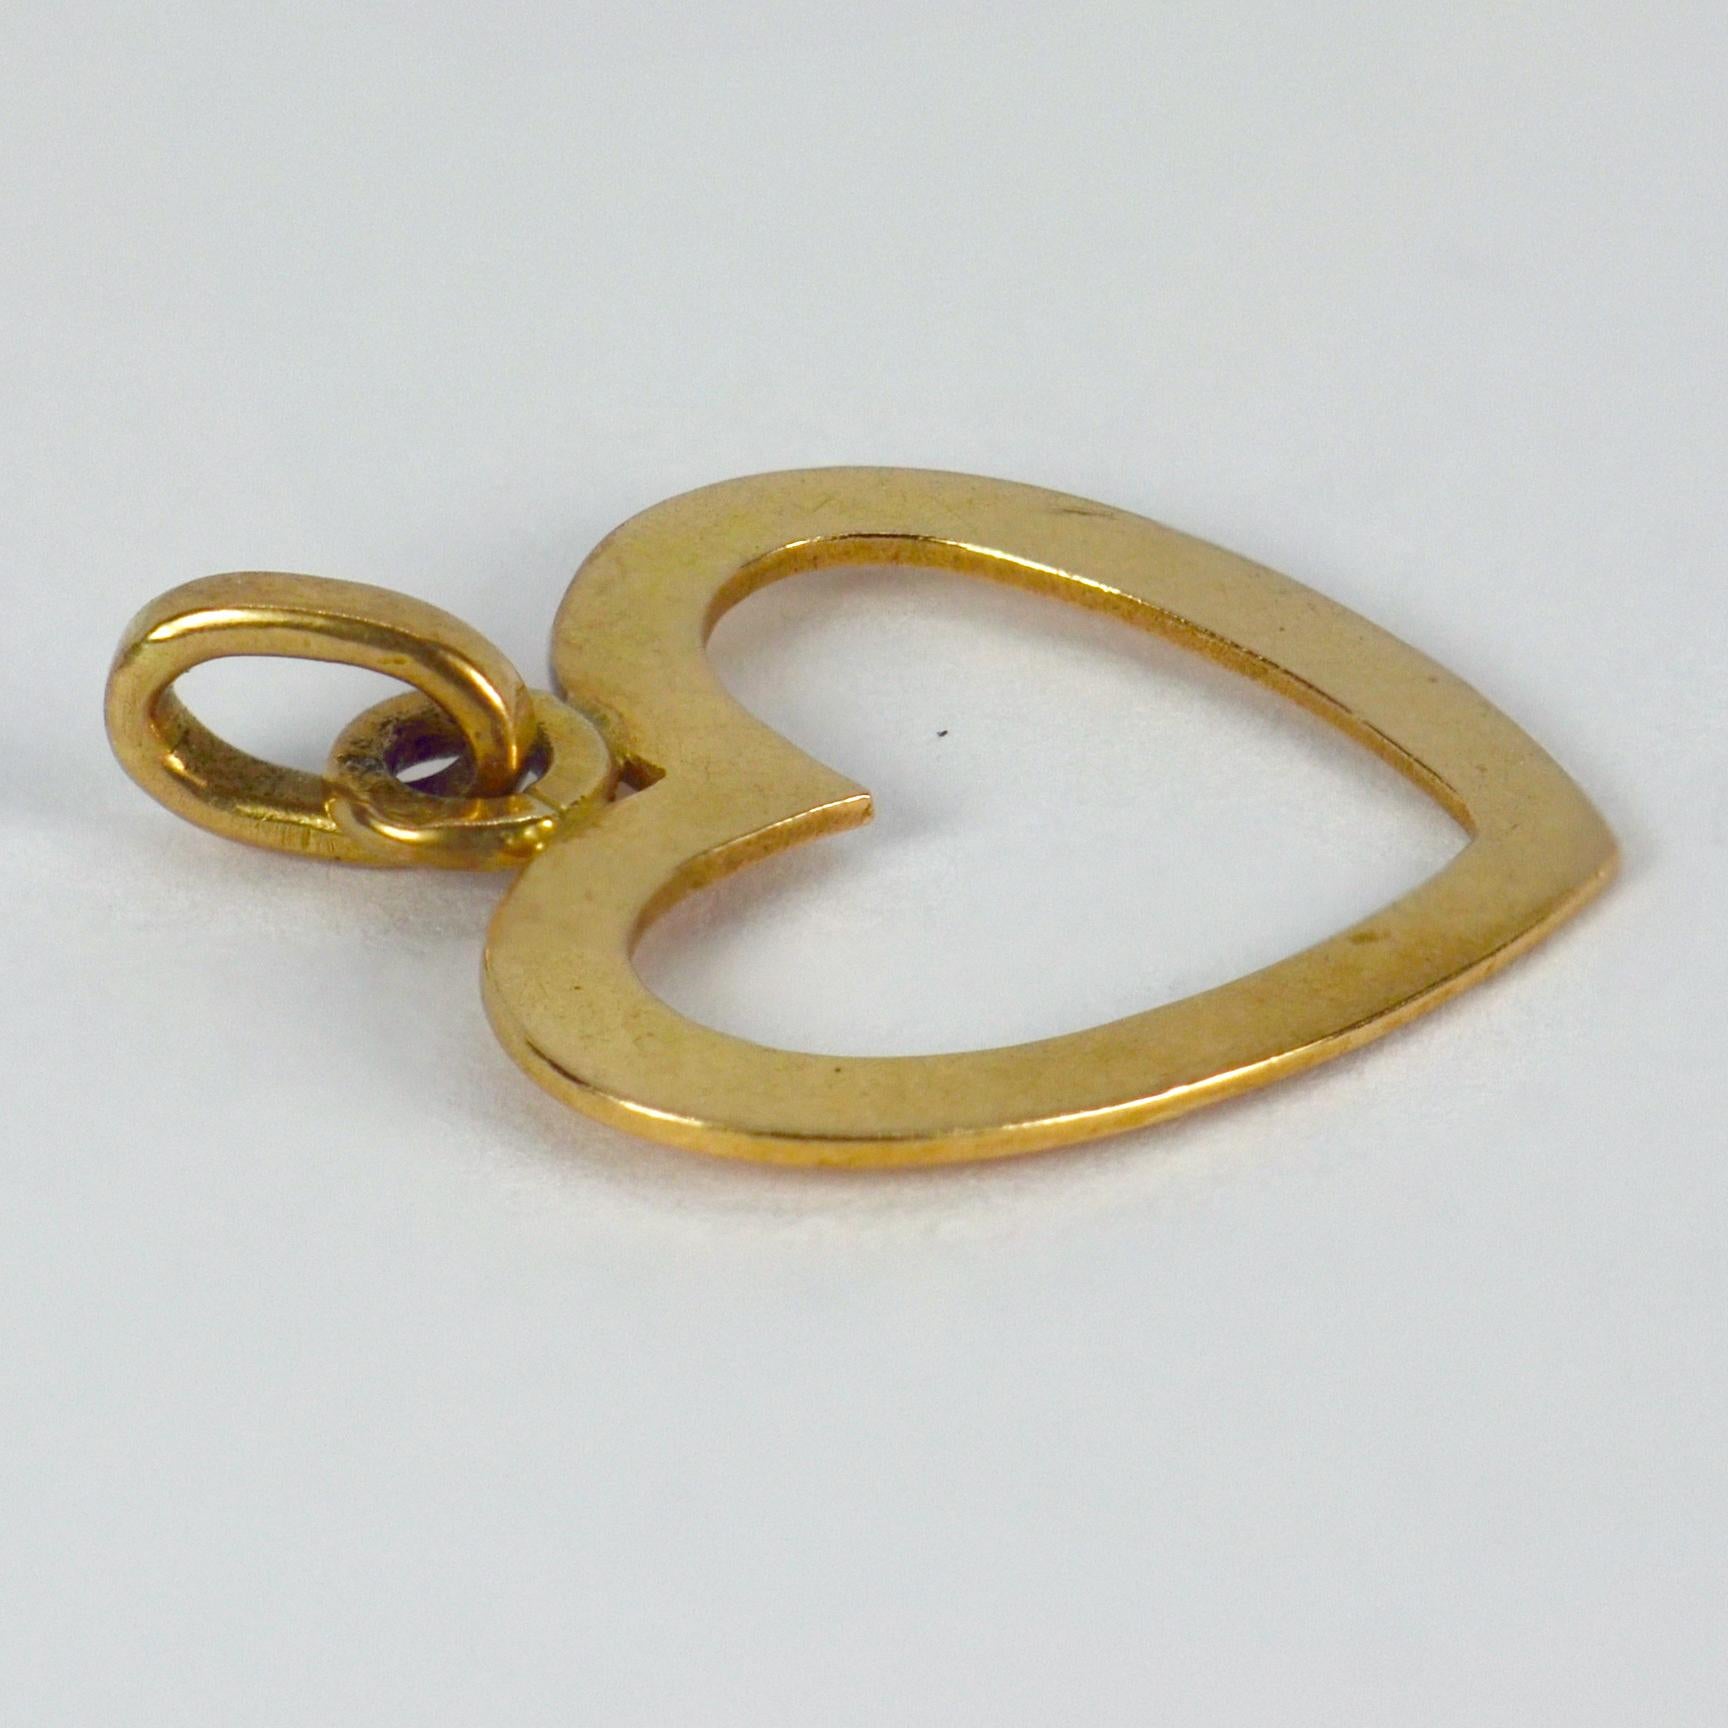 A French 18 karat (18K) yellow gold charm pendant designed as an open heart. Stamped with the French eagle’s head for 18 karat gold along with a partial makers mark.

Dimensions: 1.8 x 1.8 x 0.05 cm (not including jump ring)
Weight: 1.15 grams
